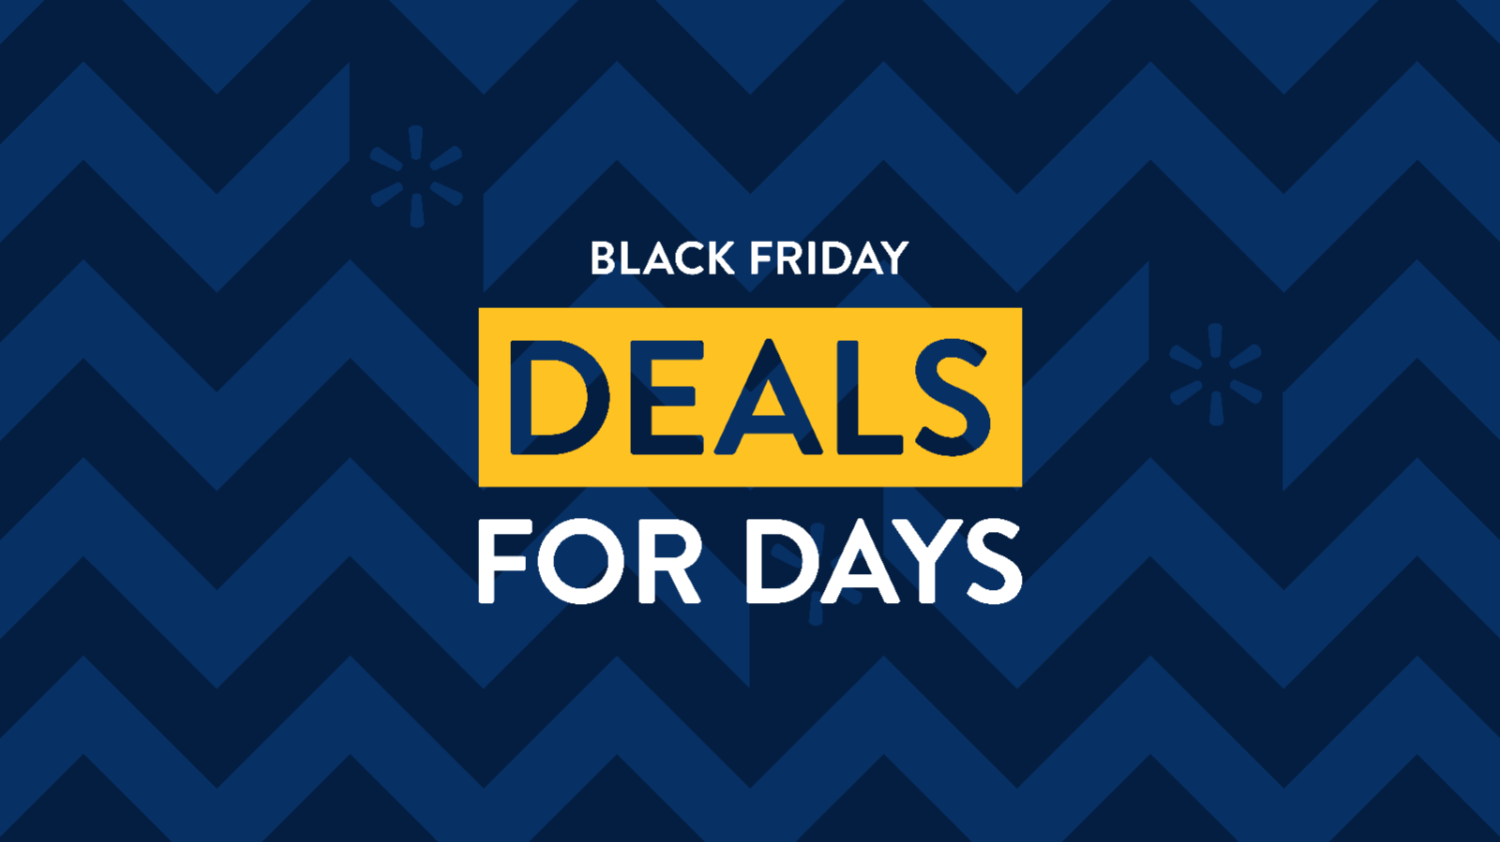 Walmart Announces “Black Friday Deals for Days,” a Reinvented Black Friday  Shopping Experience